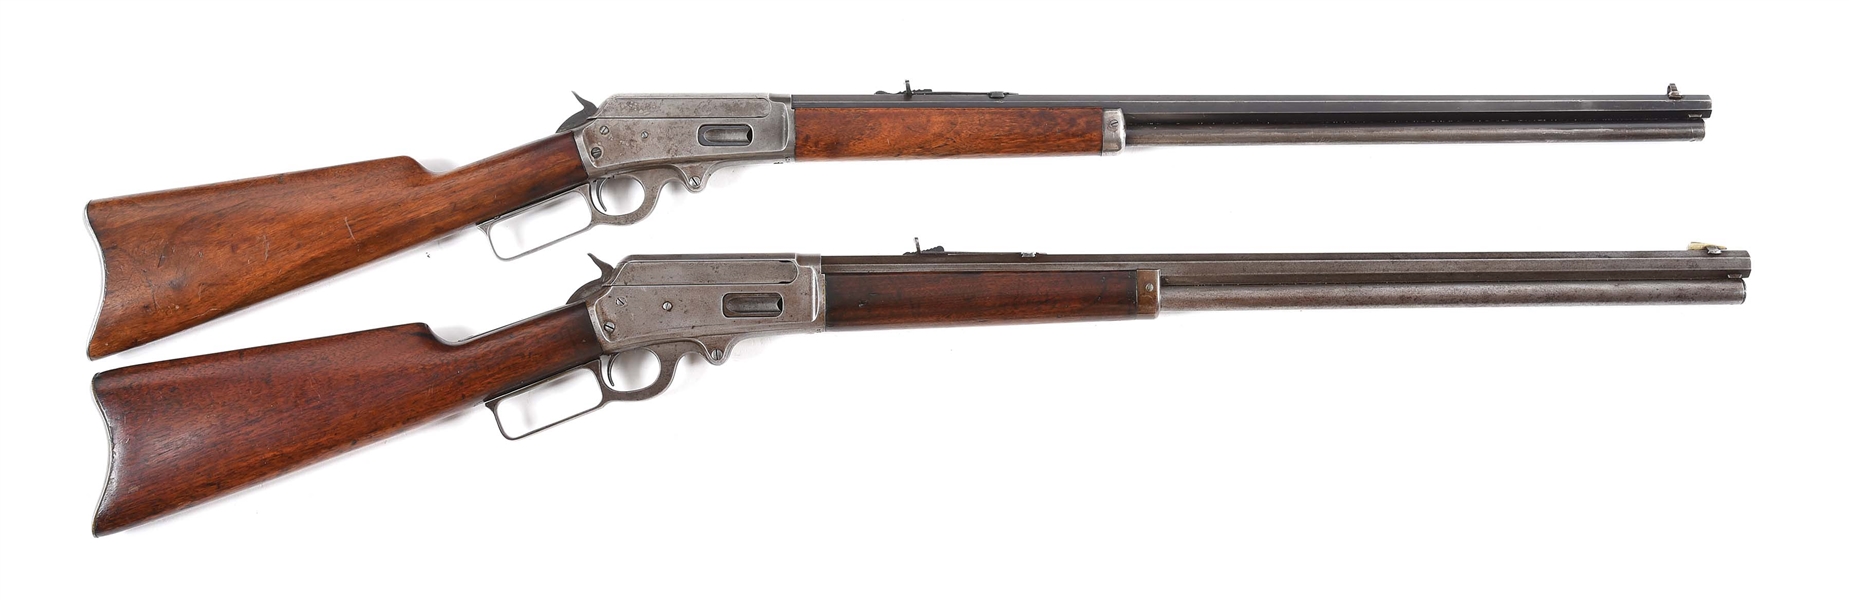 (C) LOT OF 2: (A) MARLIN MODEL 1893 AND (B) MARLIN MODEL 1895 LEVE-ACTION RIFLES.